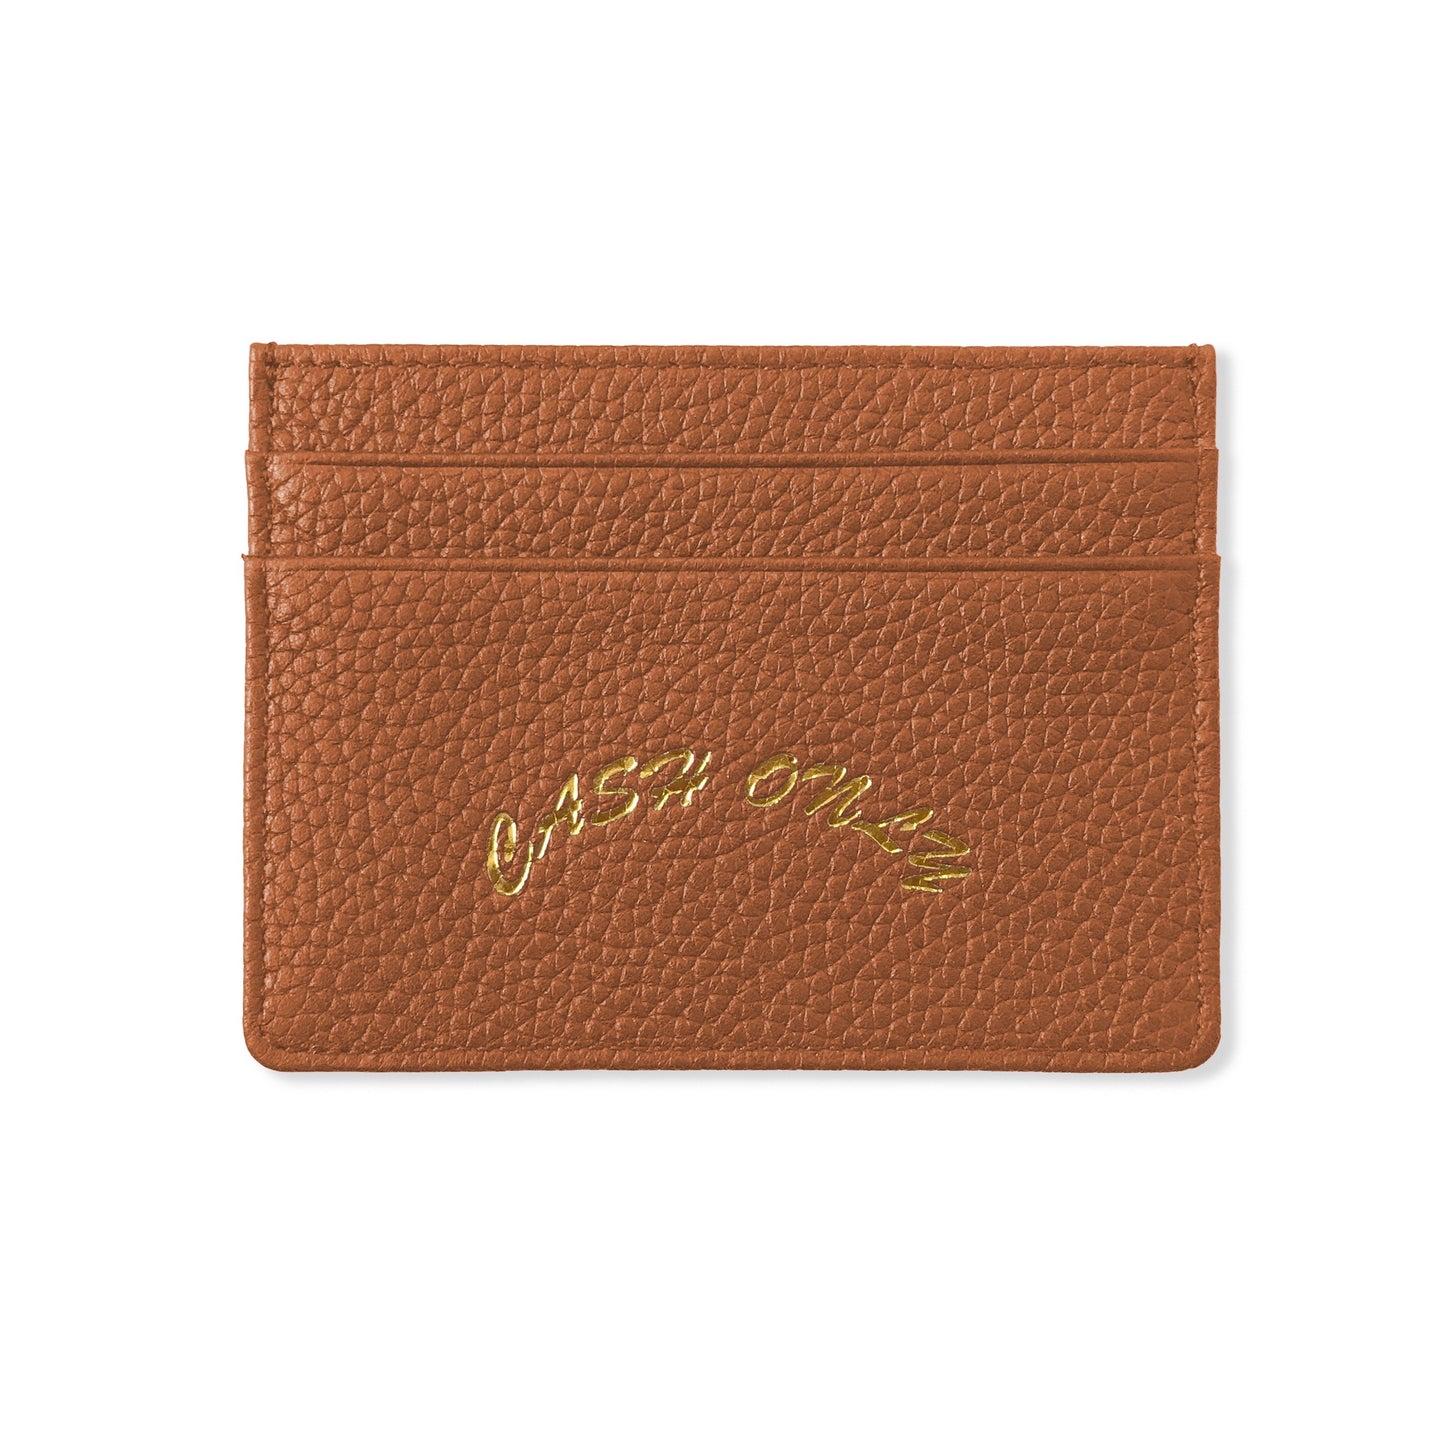 Cash Only - Leather Card Holder - Tan